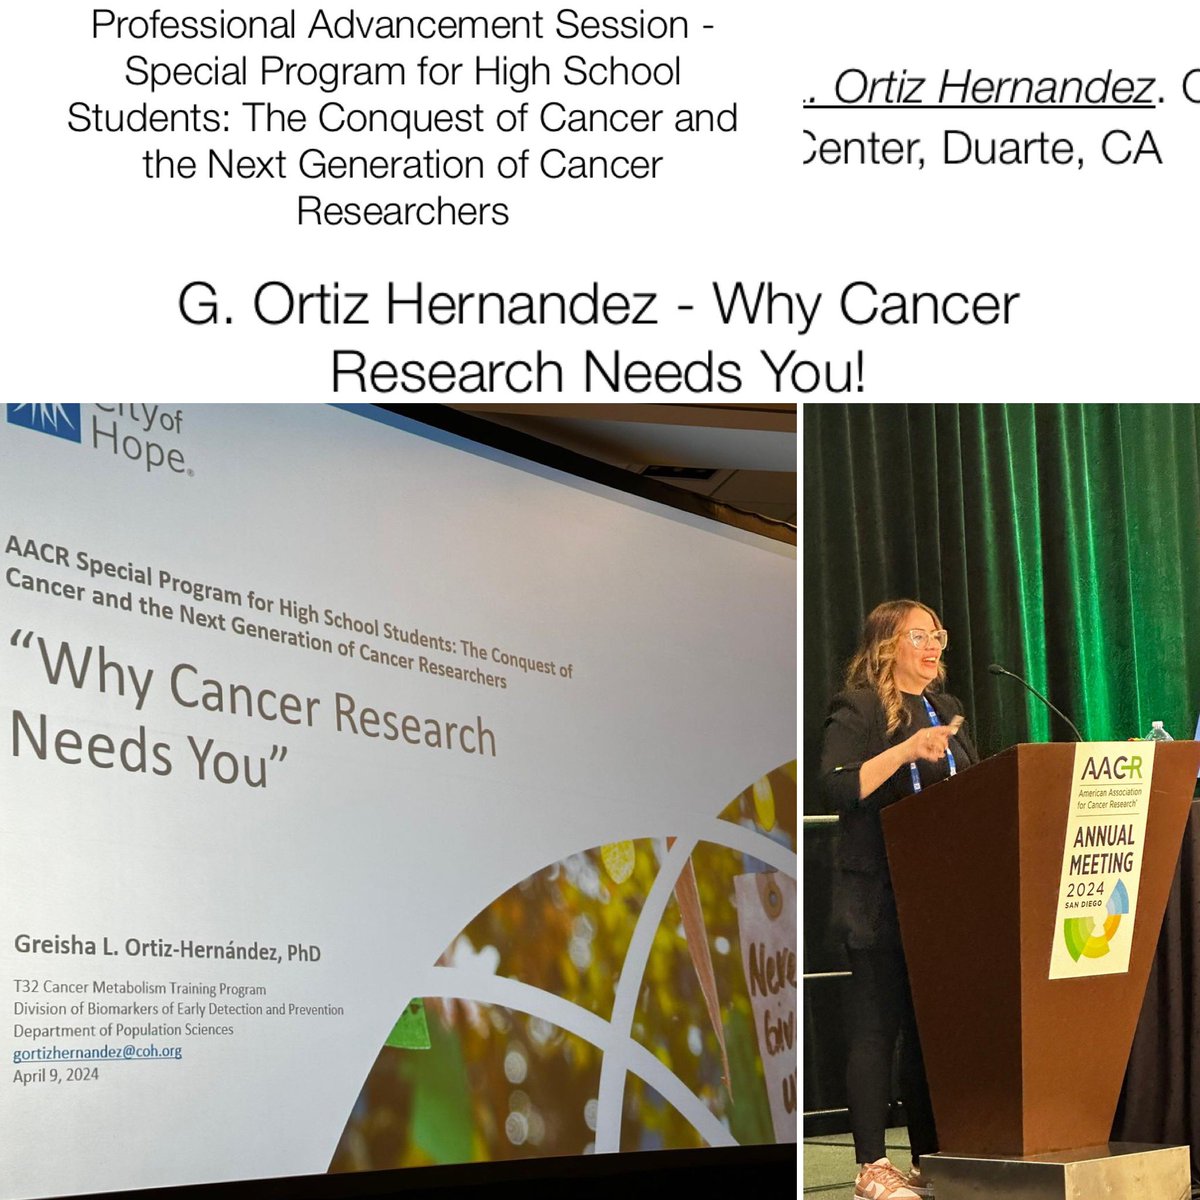 #AACRAMC member @greisha_ortiz just spoke about why #CancerResearch needs YOU!!! At the AACR High School program happening now!! #AACR24 @AACR #investinginourfuture